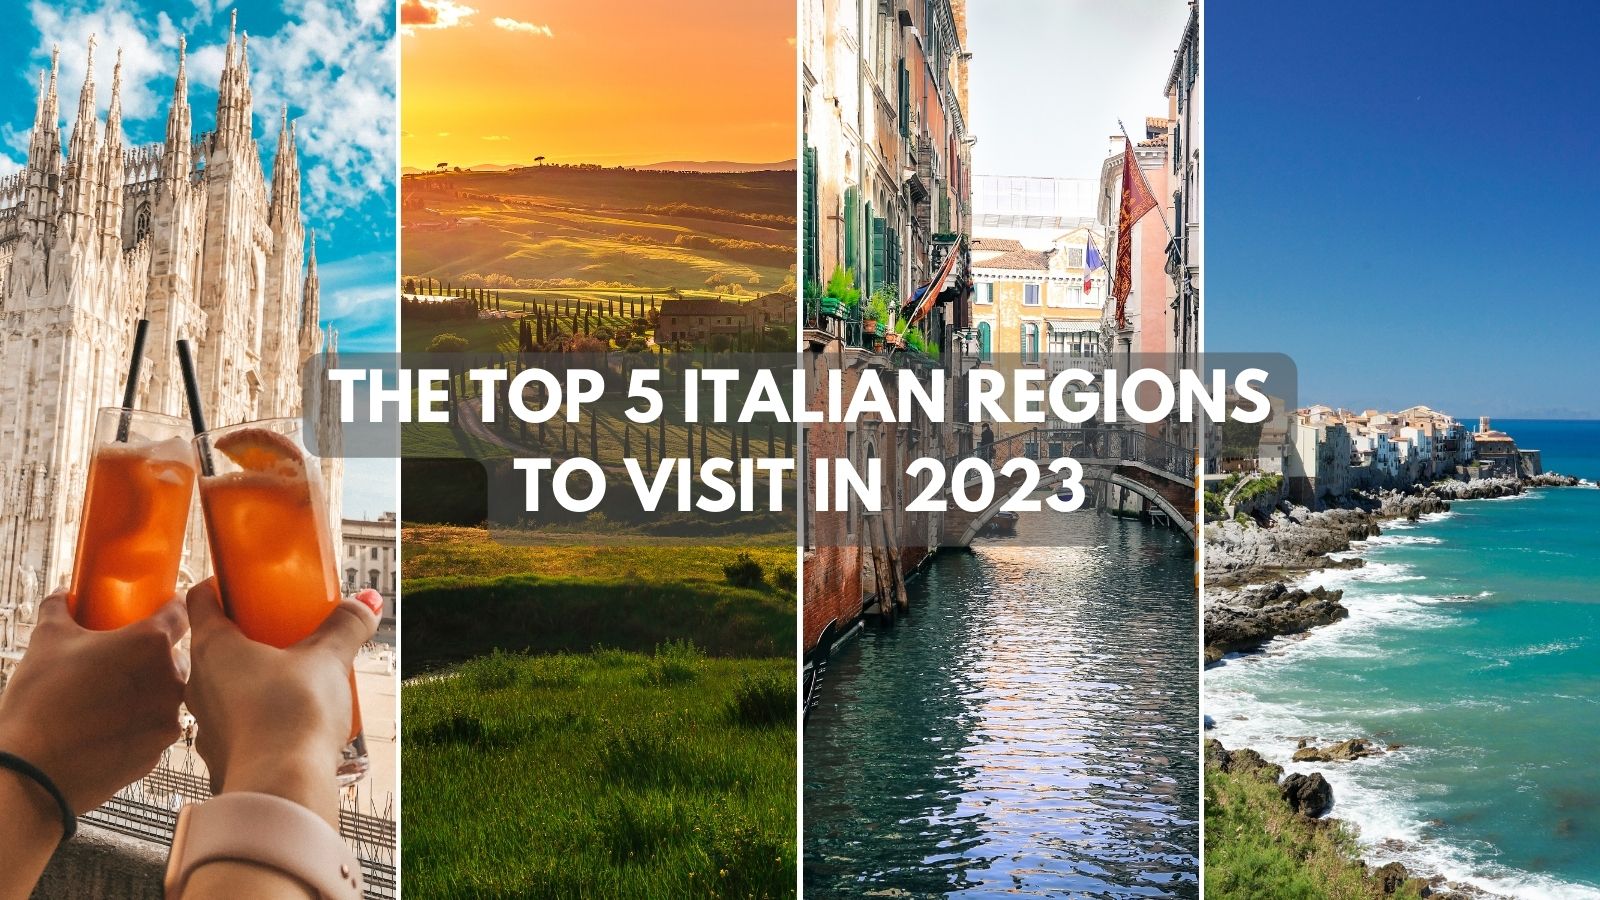 Best Things to Do in Italy (2023 Update)